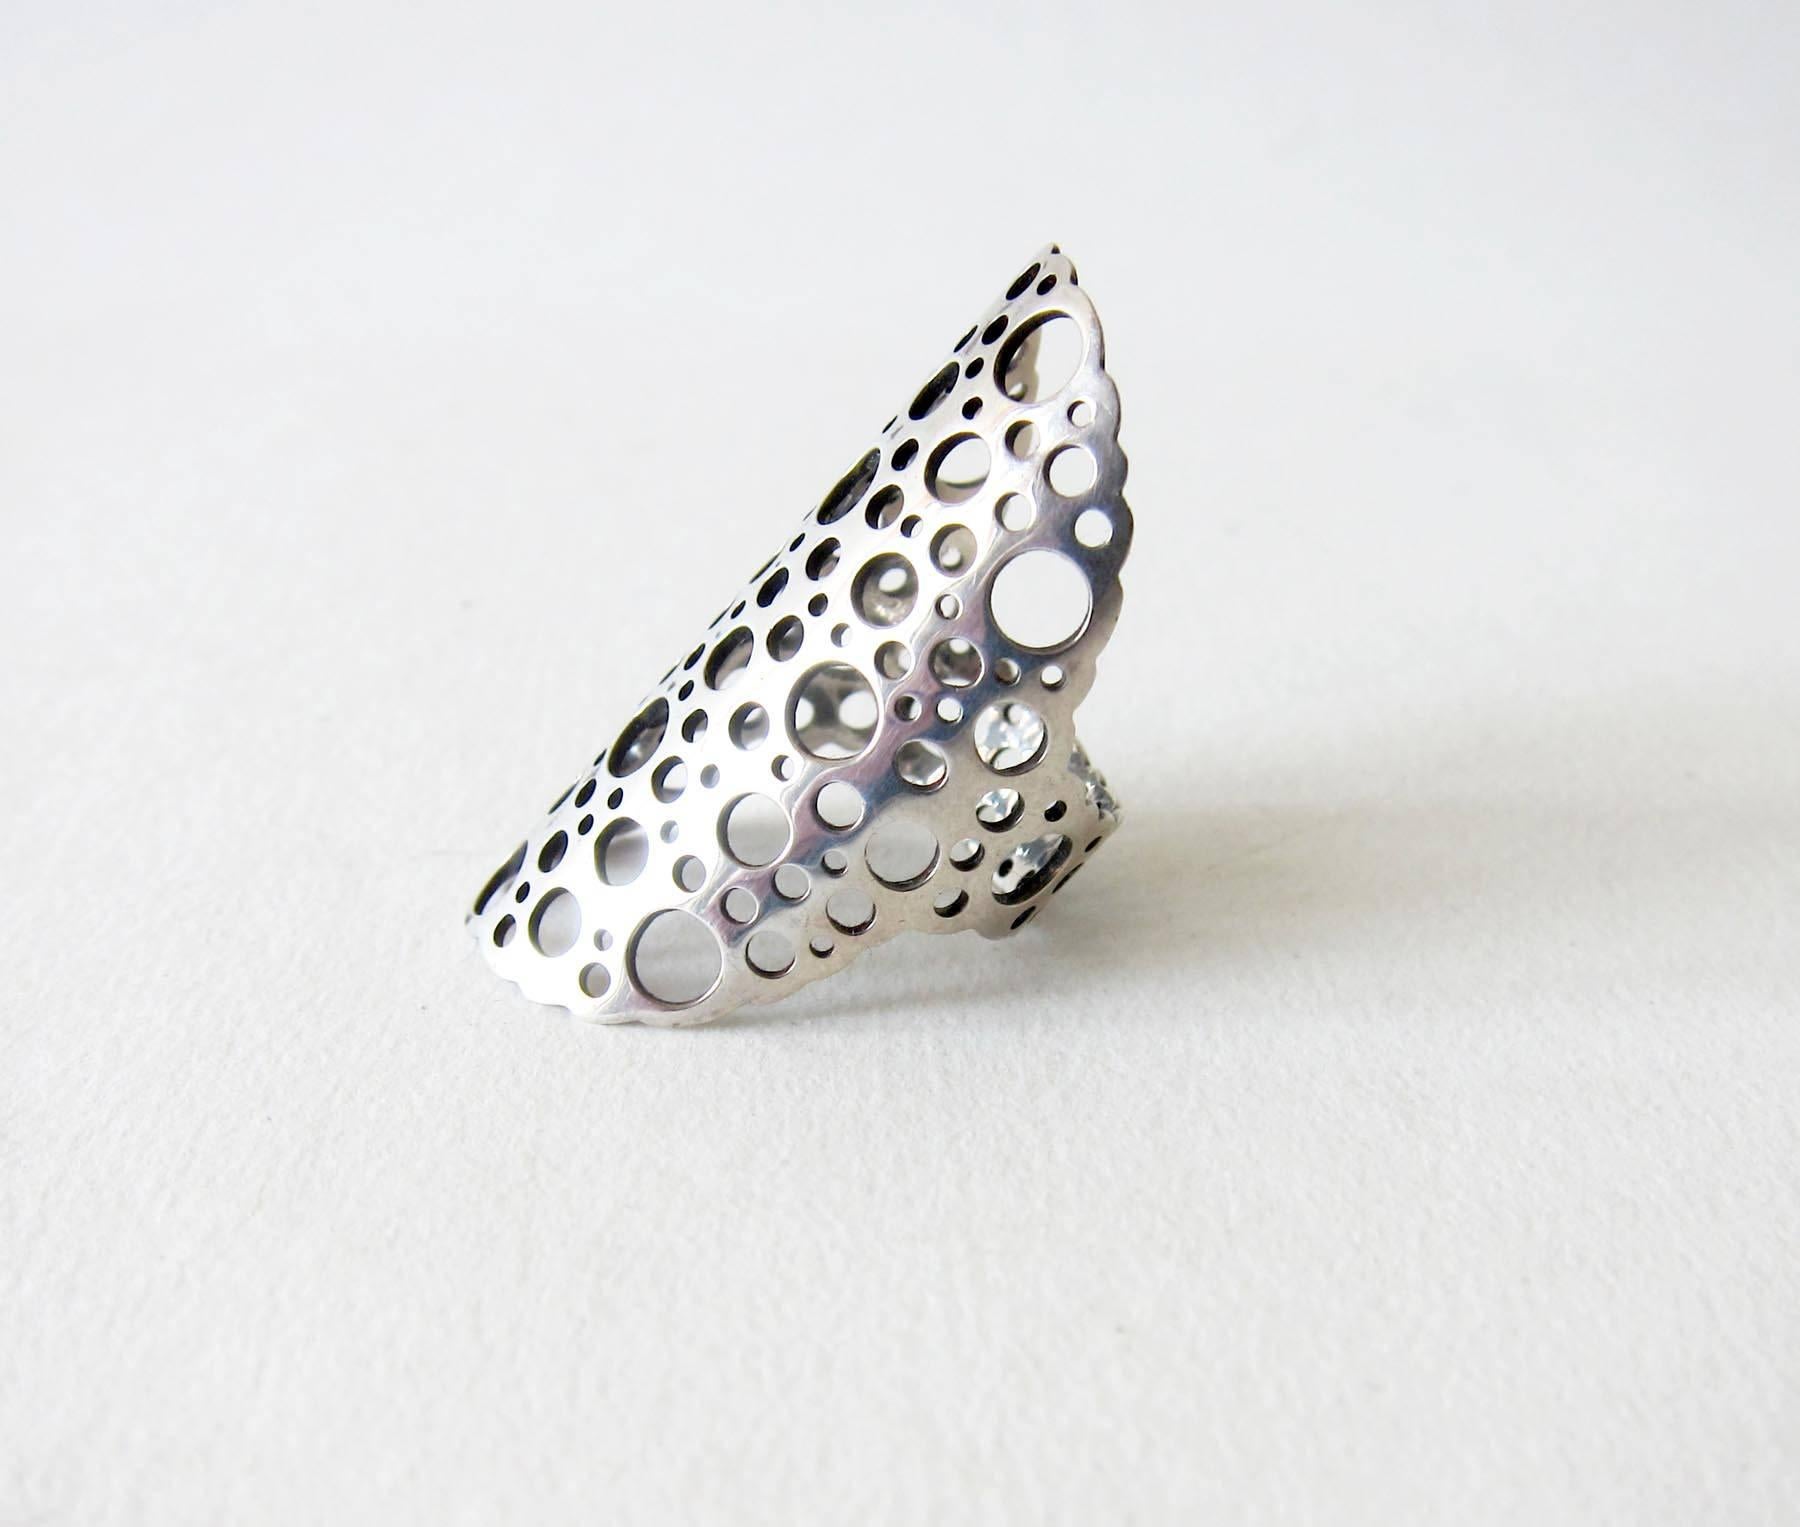 Vintage silver statement ring created by Liisa Vitali of Somero, Finland.  Ring is a finger size 7 to 7.25 and is 1.5